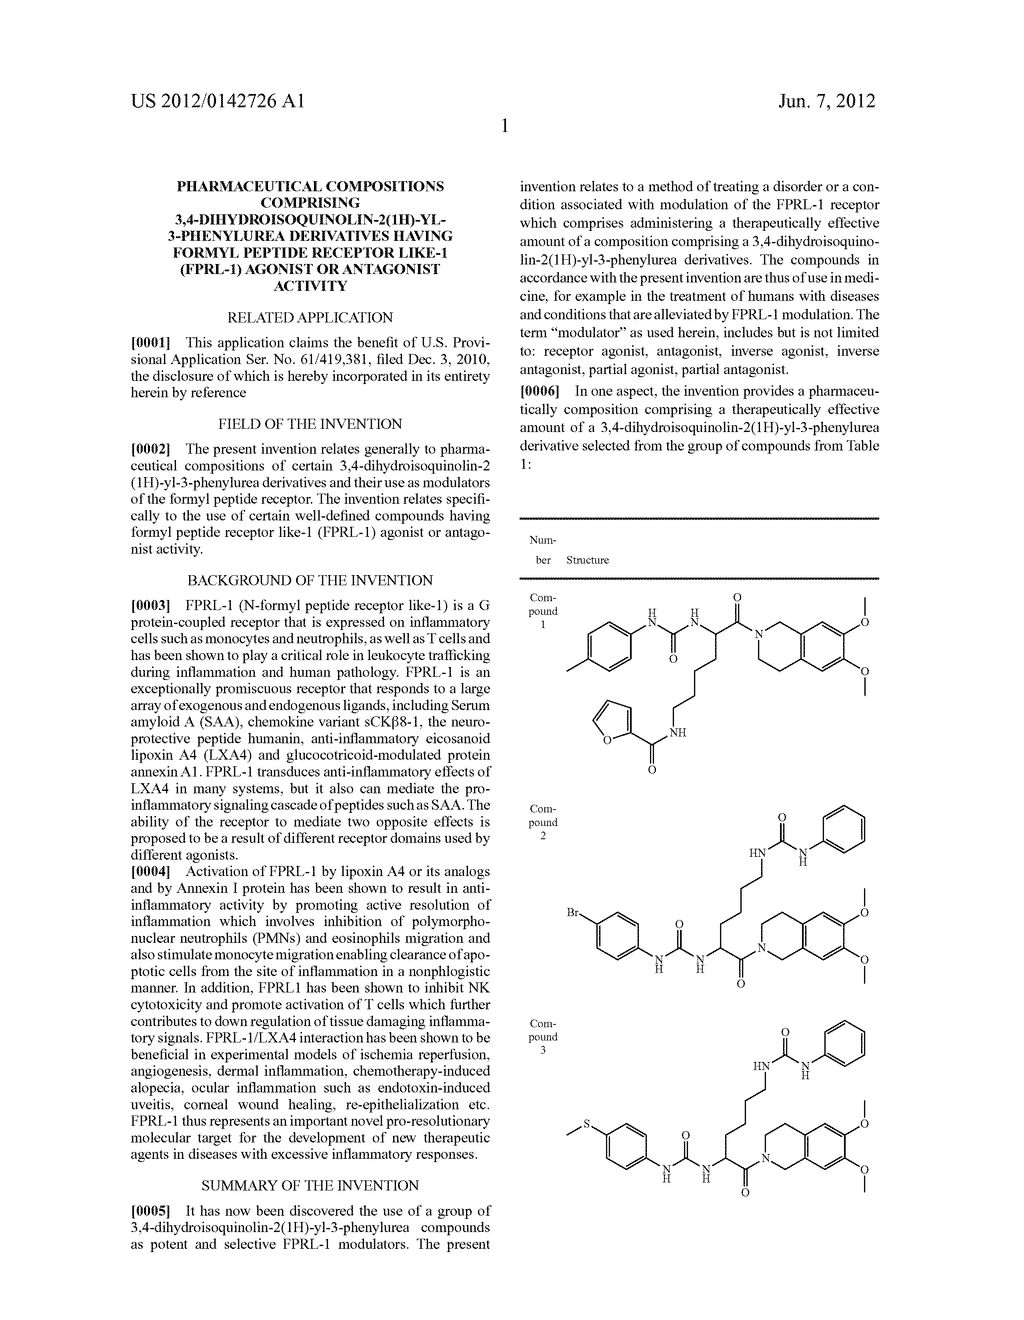 PHARMACEUTICAL COMPOSITIONS COMPRISING     3,4-DIHYDROISOQUINOLIN-2(1H)-YL-3-PHENYLUREA DERIVATIVES HAVING FORMYL     PEPTIDE RECEPTOR LIKE-1 (FPRL-1) AGONIST OR ANTAGONIST ACTIVITY - diagram, schematic, and image 02